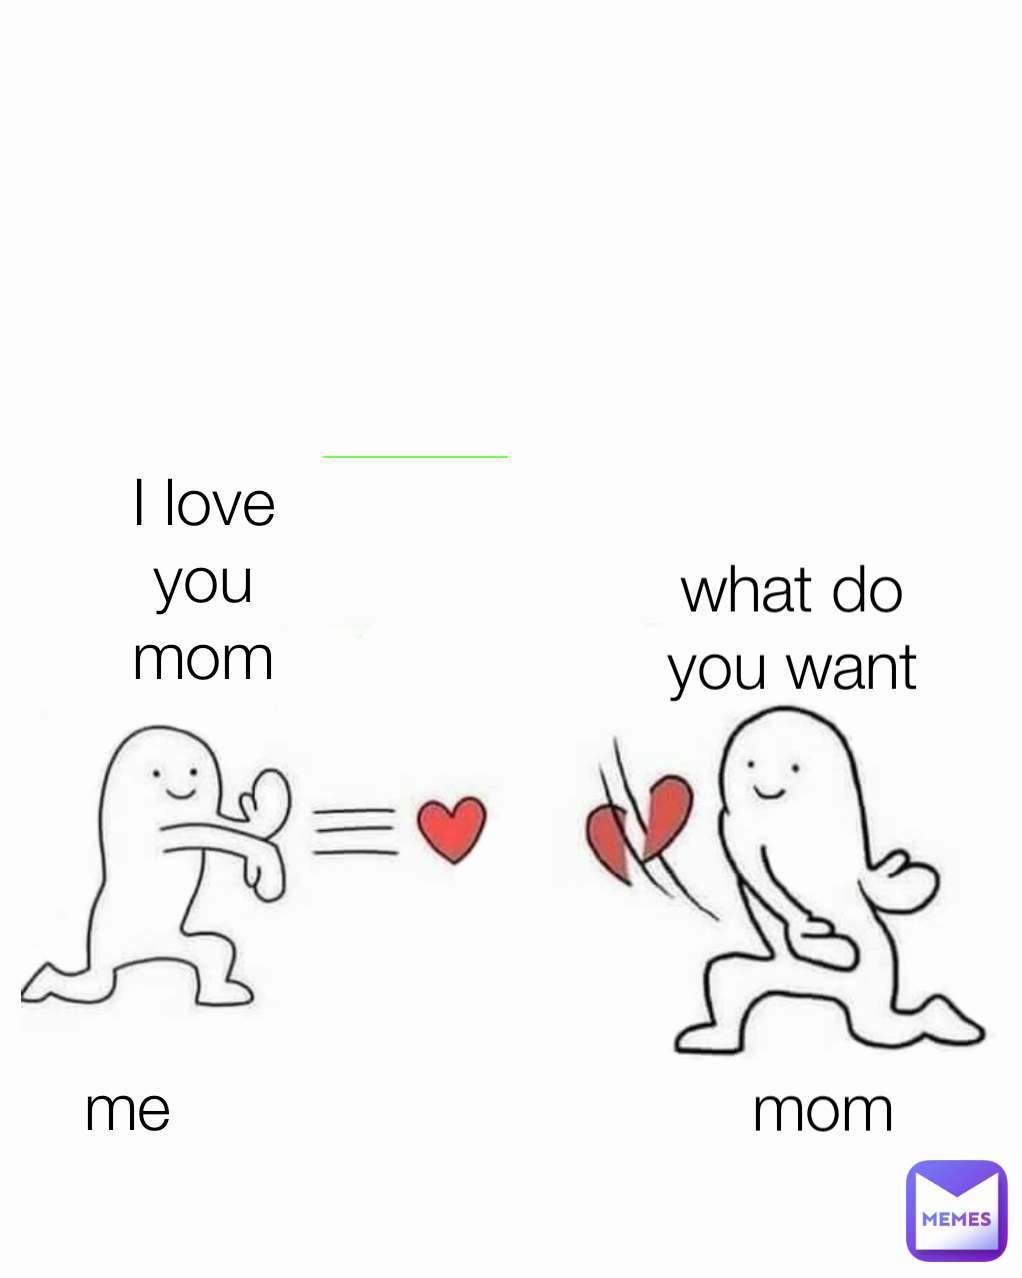 mom what do you want me I love you mom | @zapperking | Memes